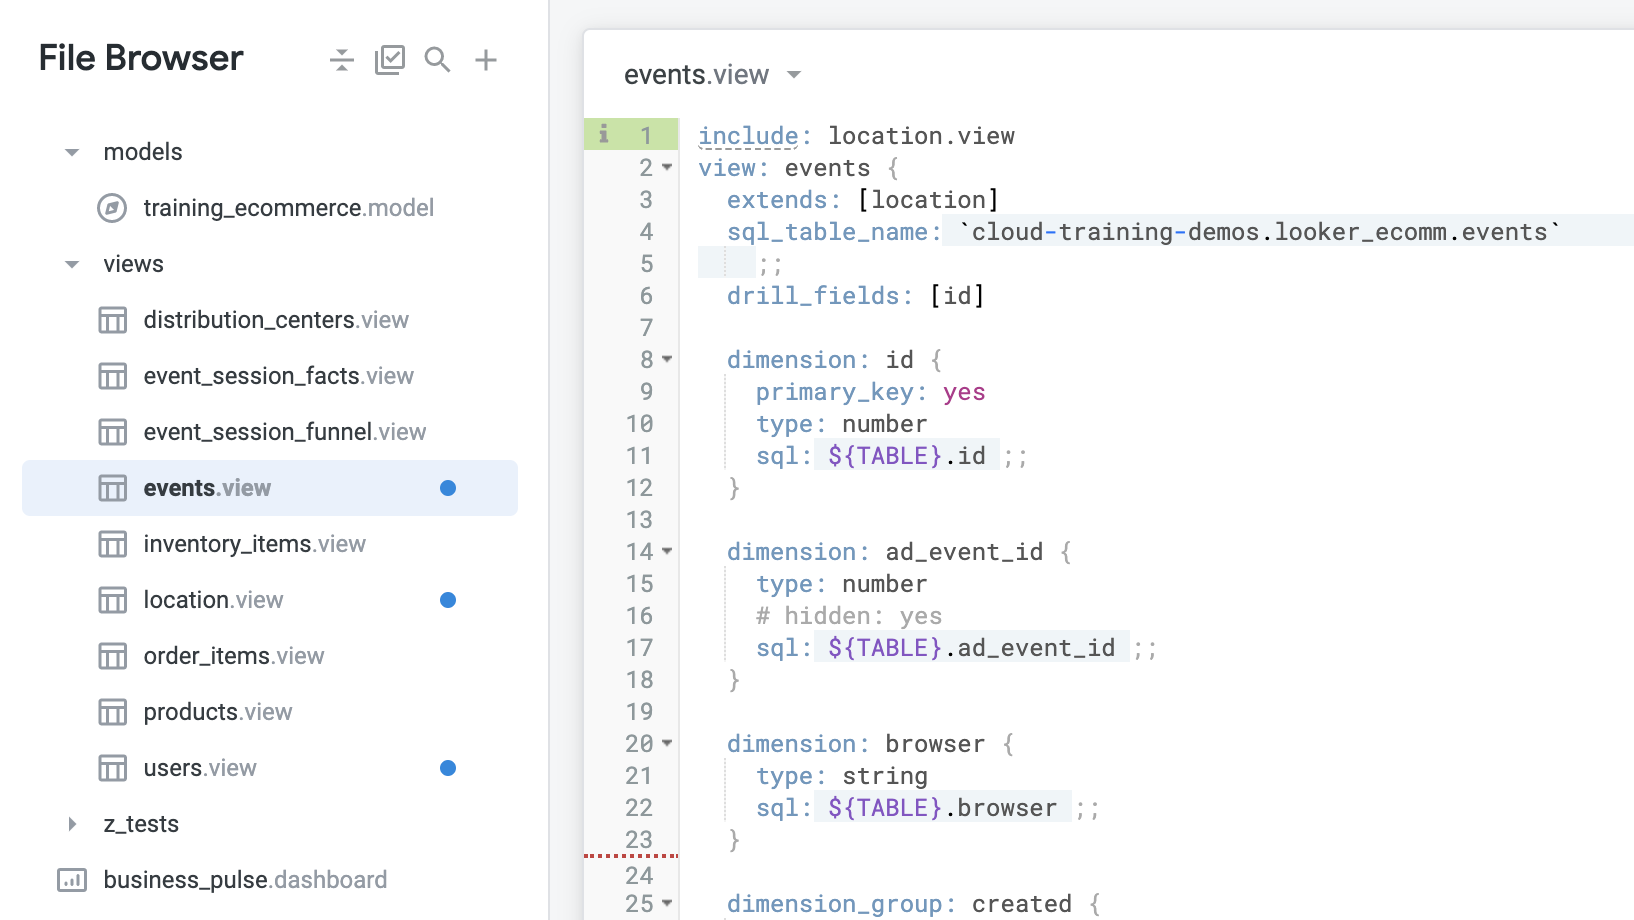 The open updated events.view file which includes 25 lines of code